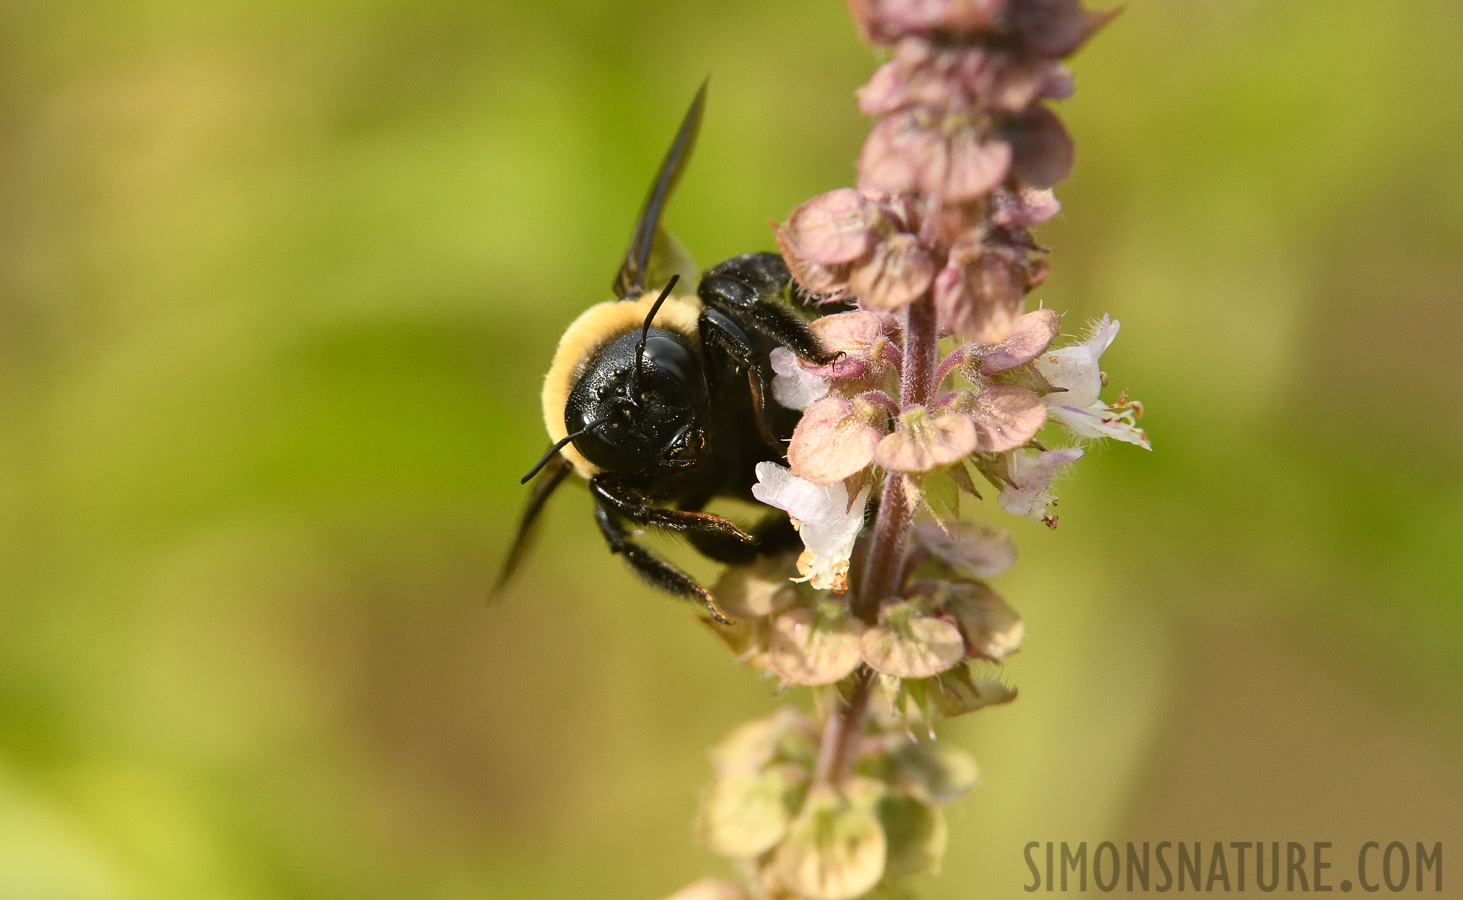 Xylocopa virginica [400 mm, 1/1000 sec at f / 9.0, ISO 1600]